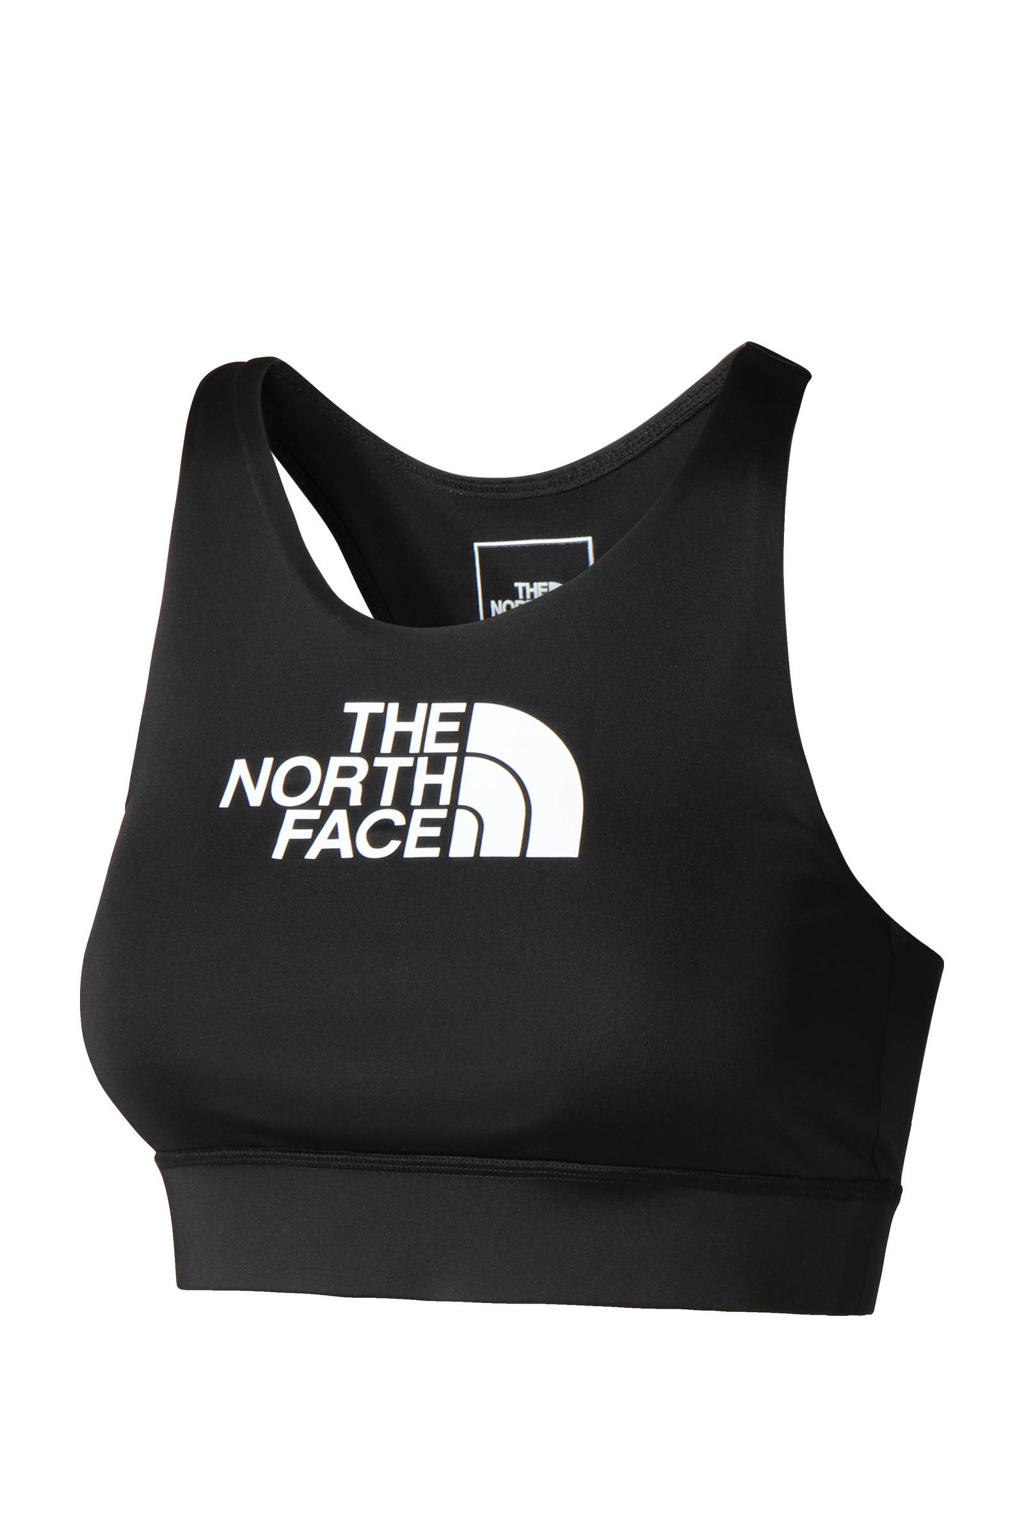 The North Face level 2 sportbh zwart